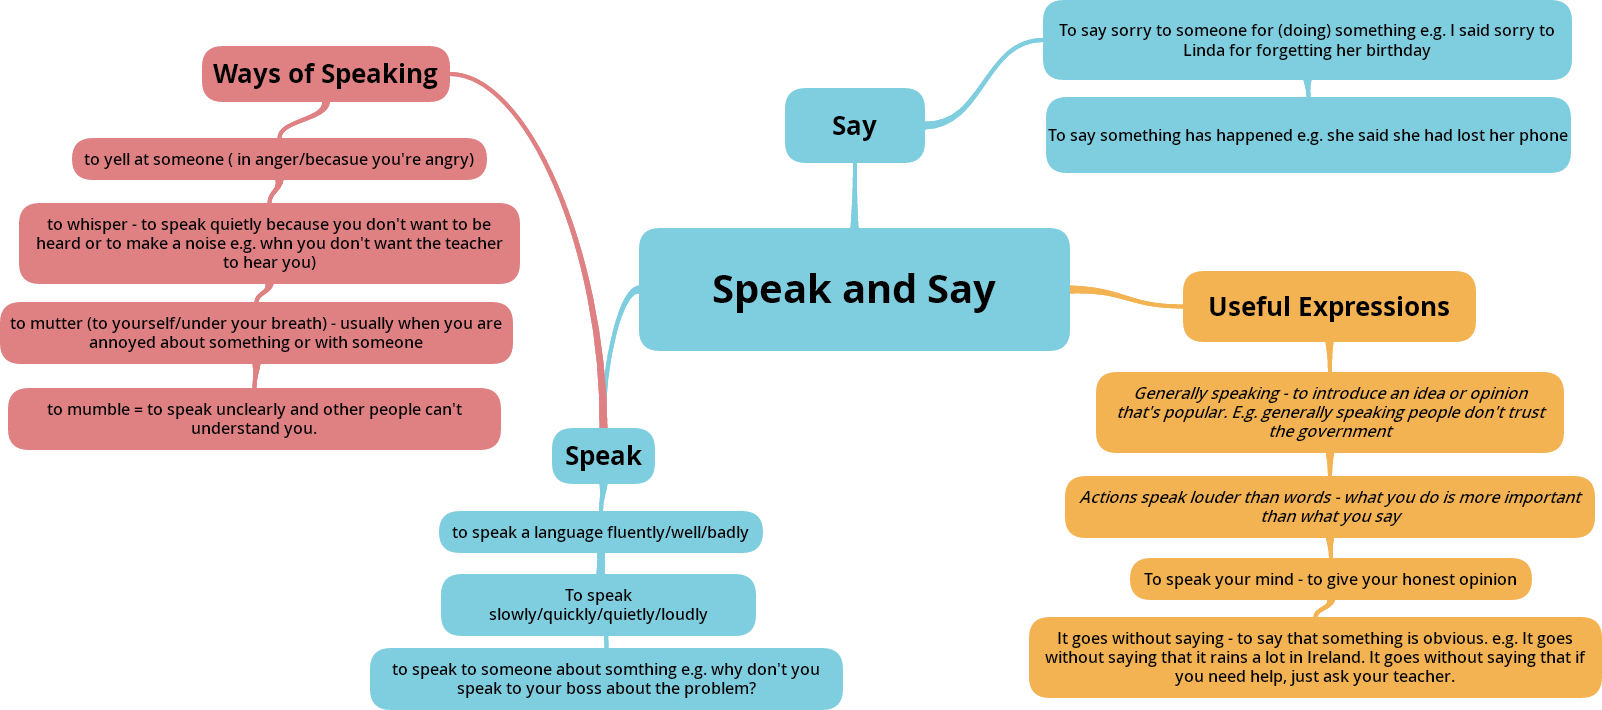 Ways of speaking. Ways of speaking in English. Speaking of или speaking about. Generally speaking. It goes without say